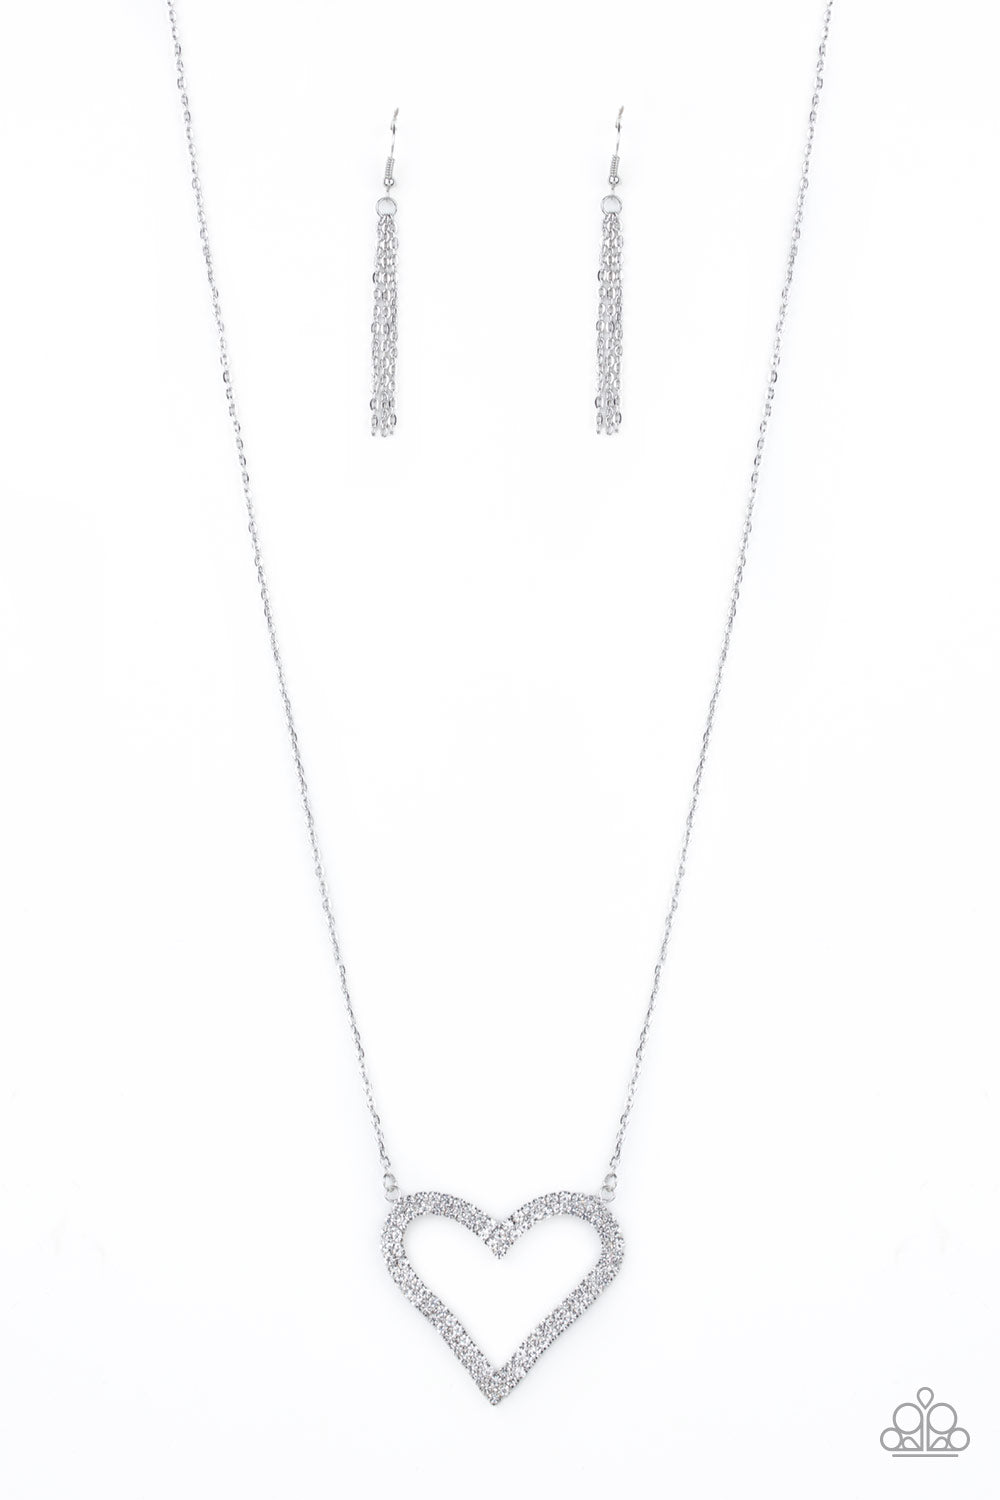 Pull Some HEART-strings - White Necklace - Paparazzi Accessories - Paparazzi Accessories 